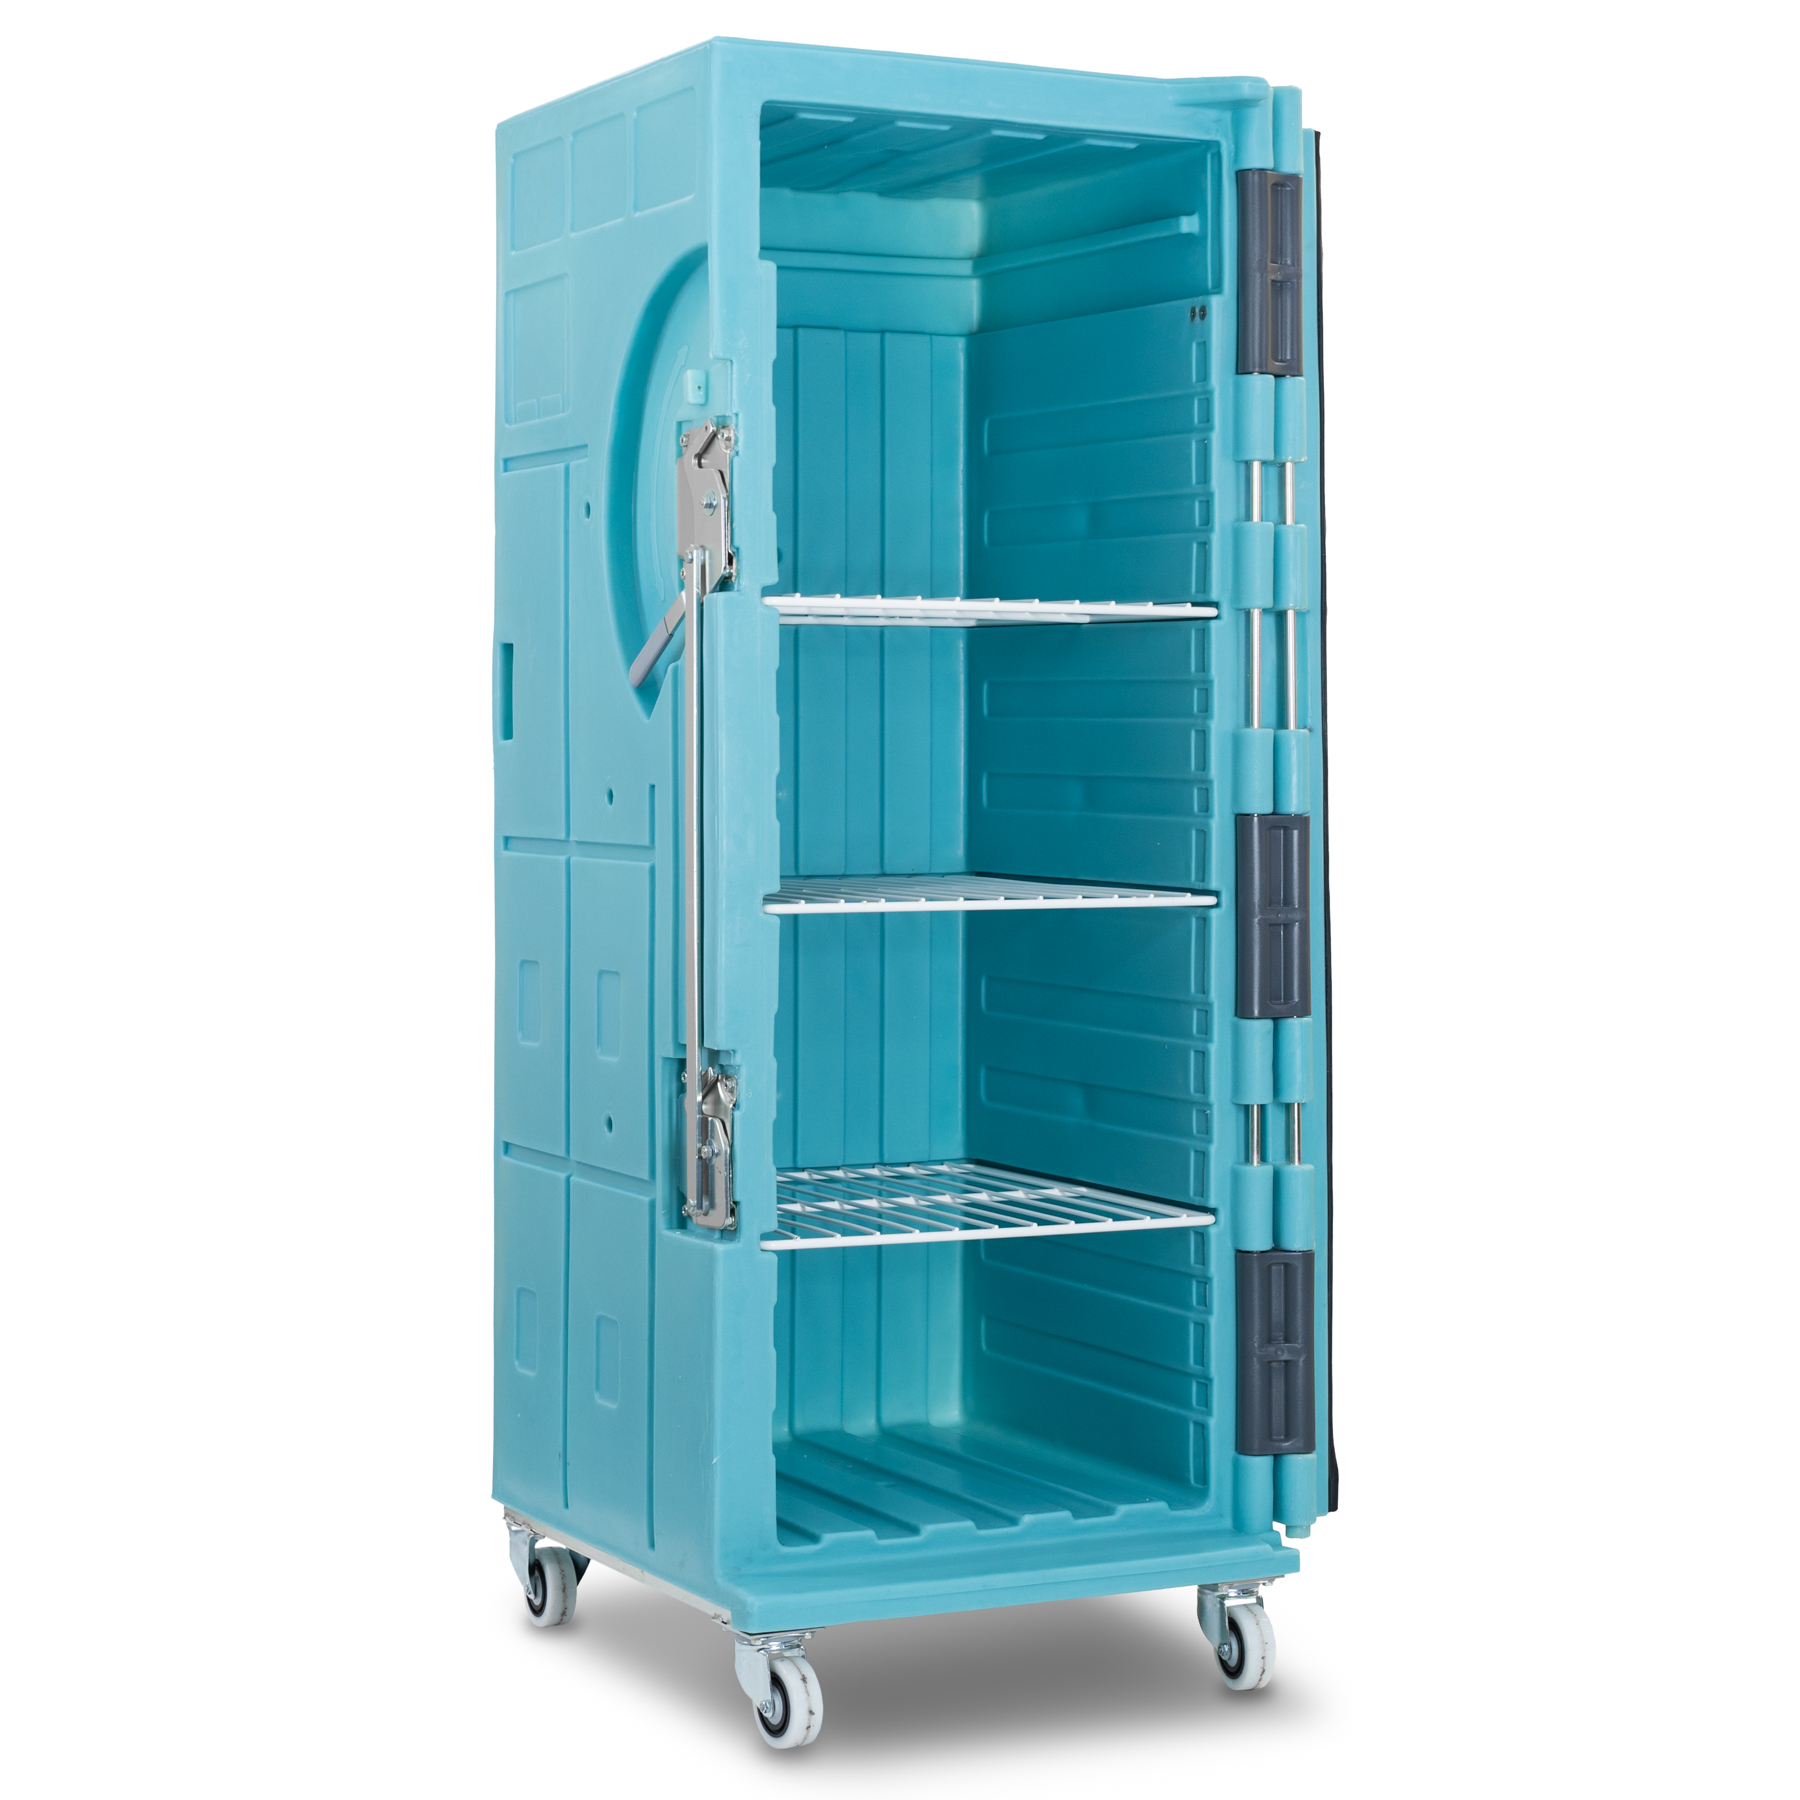 INSULATED ROLL 580 OLIVO MIDDLE SHELF